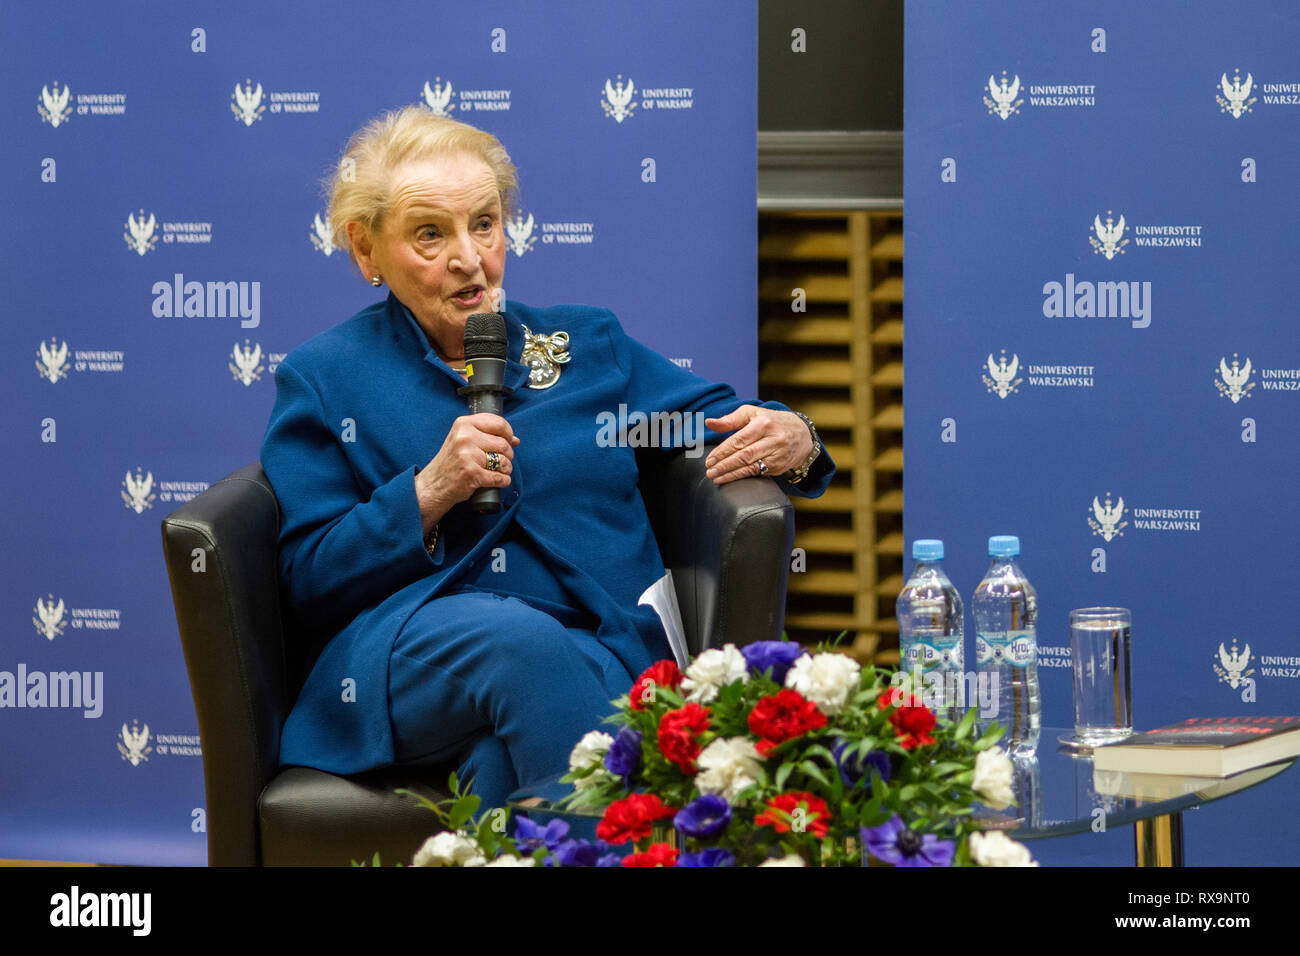 Madeleine Albright seen speaking during the open meeting at the Warsaw University. On Friday at the University of Warsaw, an open meeting with Madeleine Albright took place in the hall of the former University Library. Her visit to the University of Warsaw is connected with last year's edition of the Polish language version of her book entitled "Fascism: A Warning." Madeleine Albright was the secretary of the state in US in 1997-2001. She was the first woman on this position in the United States. In 1993, President Clinton appointed her to the position of US Ambassador to the United Nations. Stock Photo